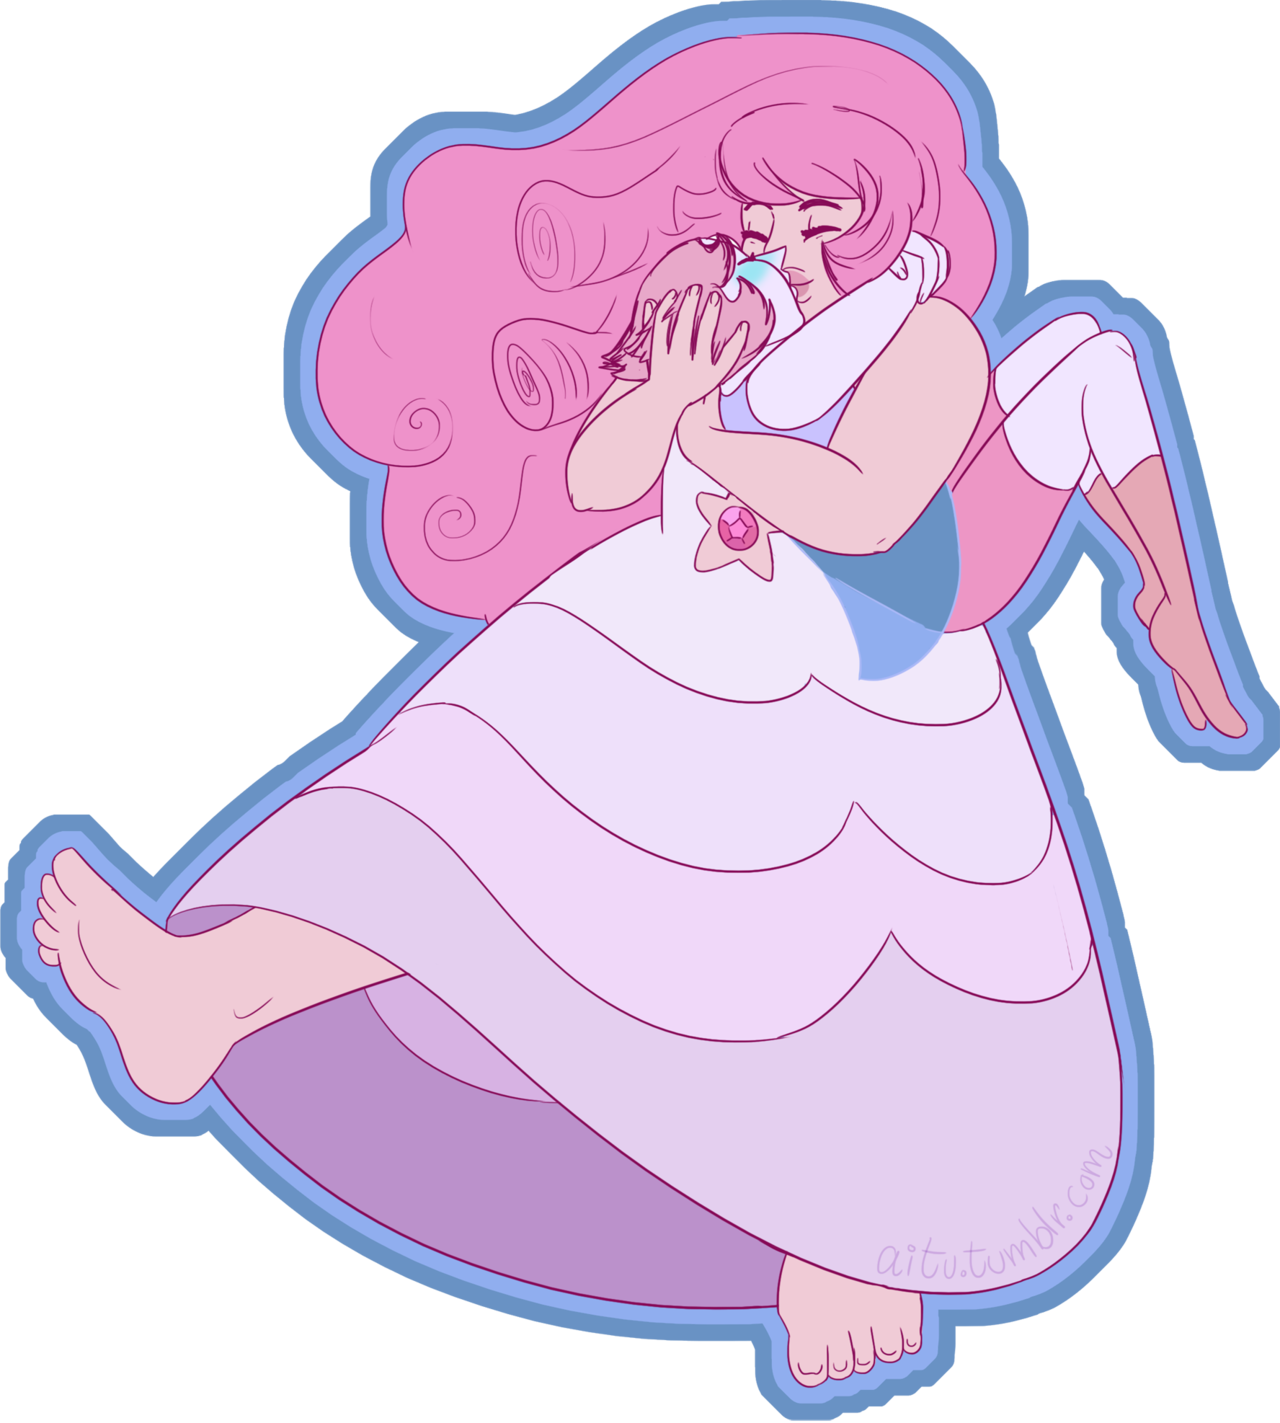 Femslash February 2019 Day 13: Pearlrose! I think true happiness is being able to pick up your loved one and spin them around. SU characters have it good.